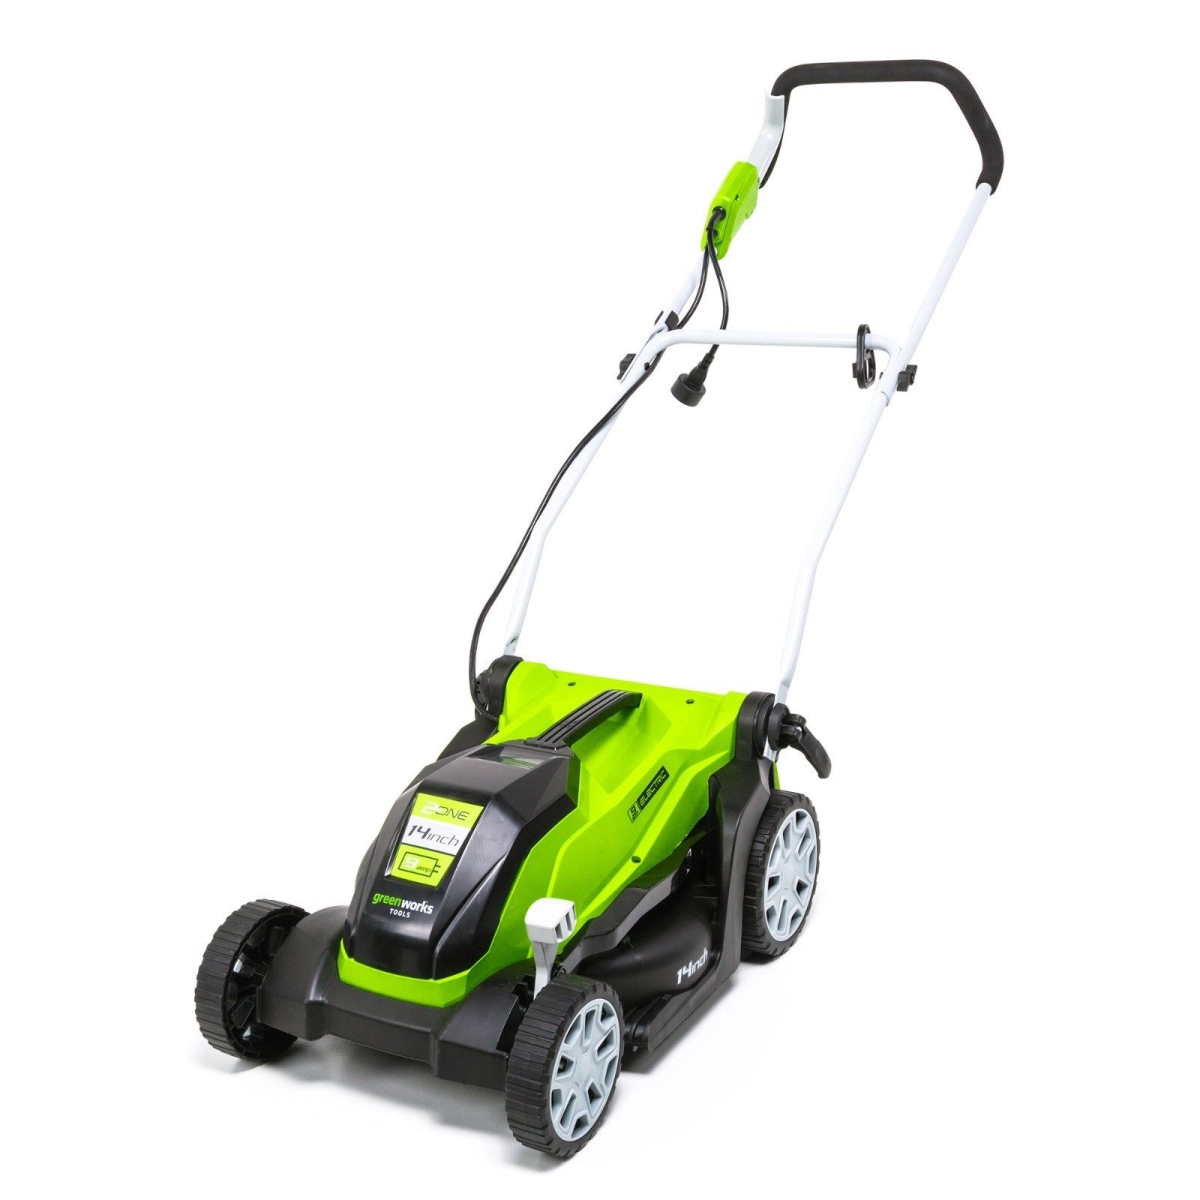 2507402 14 In. Corded Electric 9a Lawn Mower, Green & Black